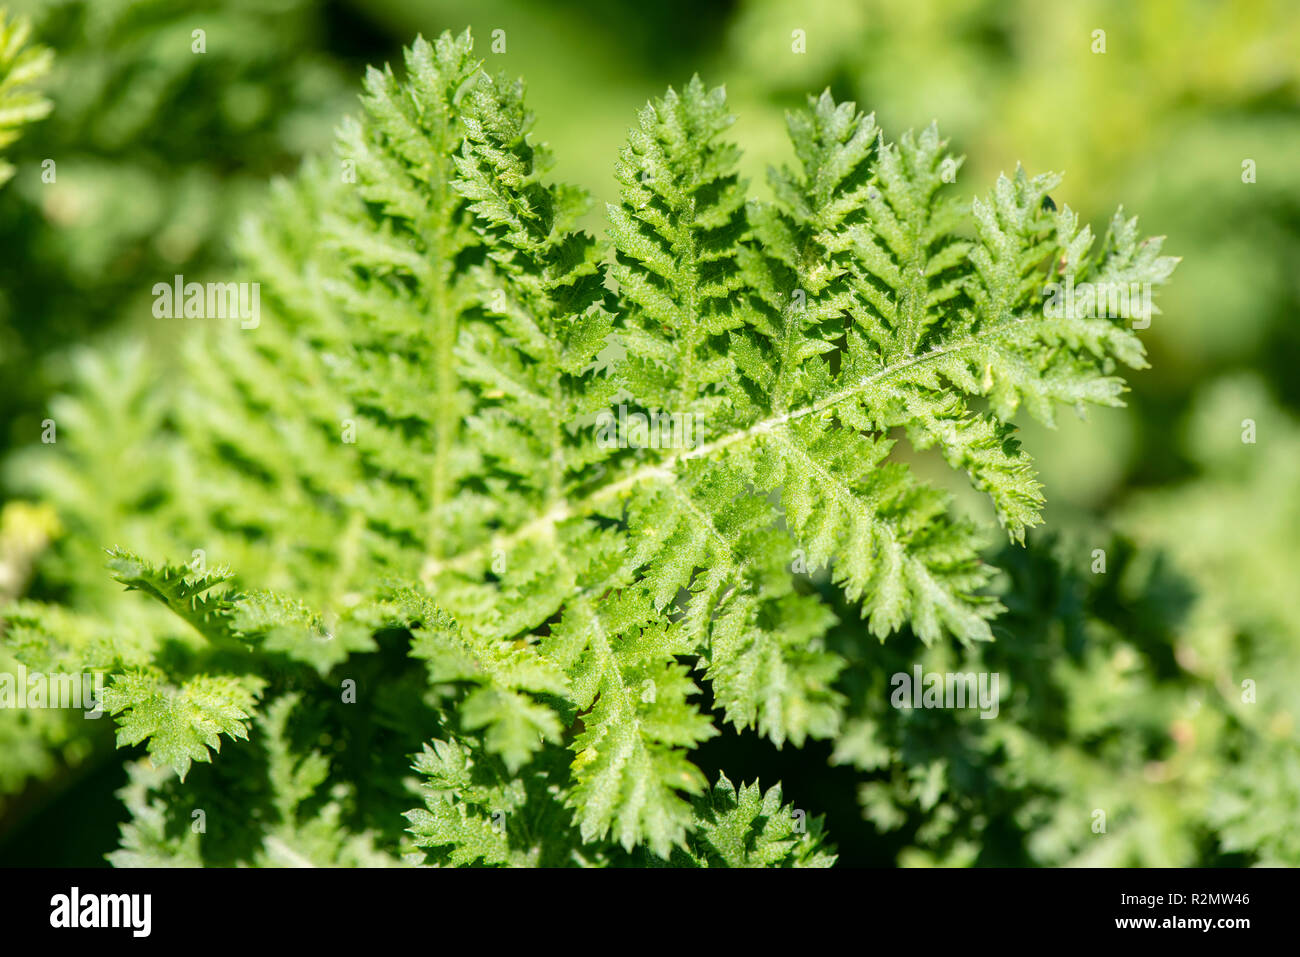 Krauser tansy as a medicinal plant for natural medicine and herbal medicine Stock Photo